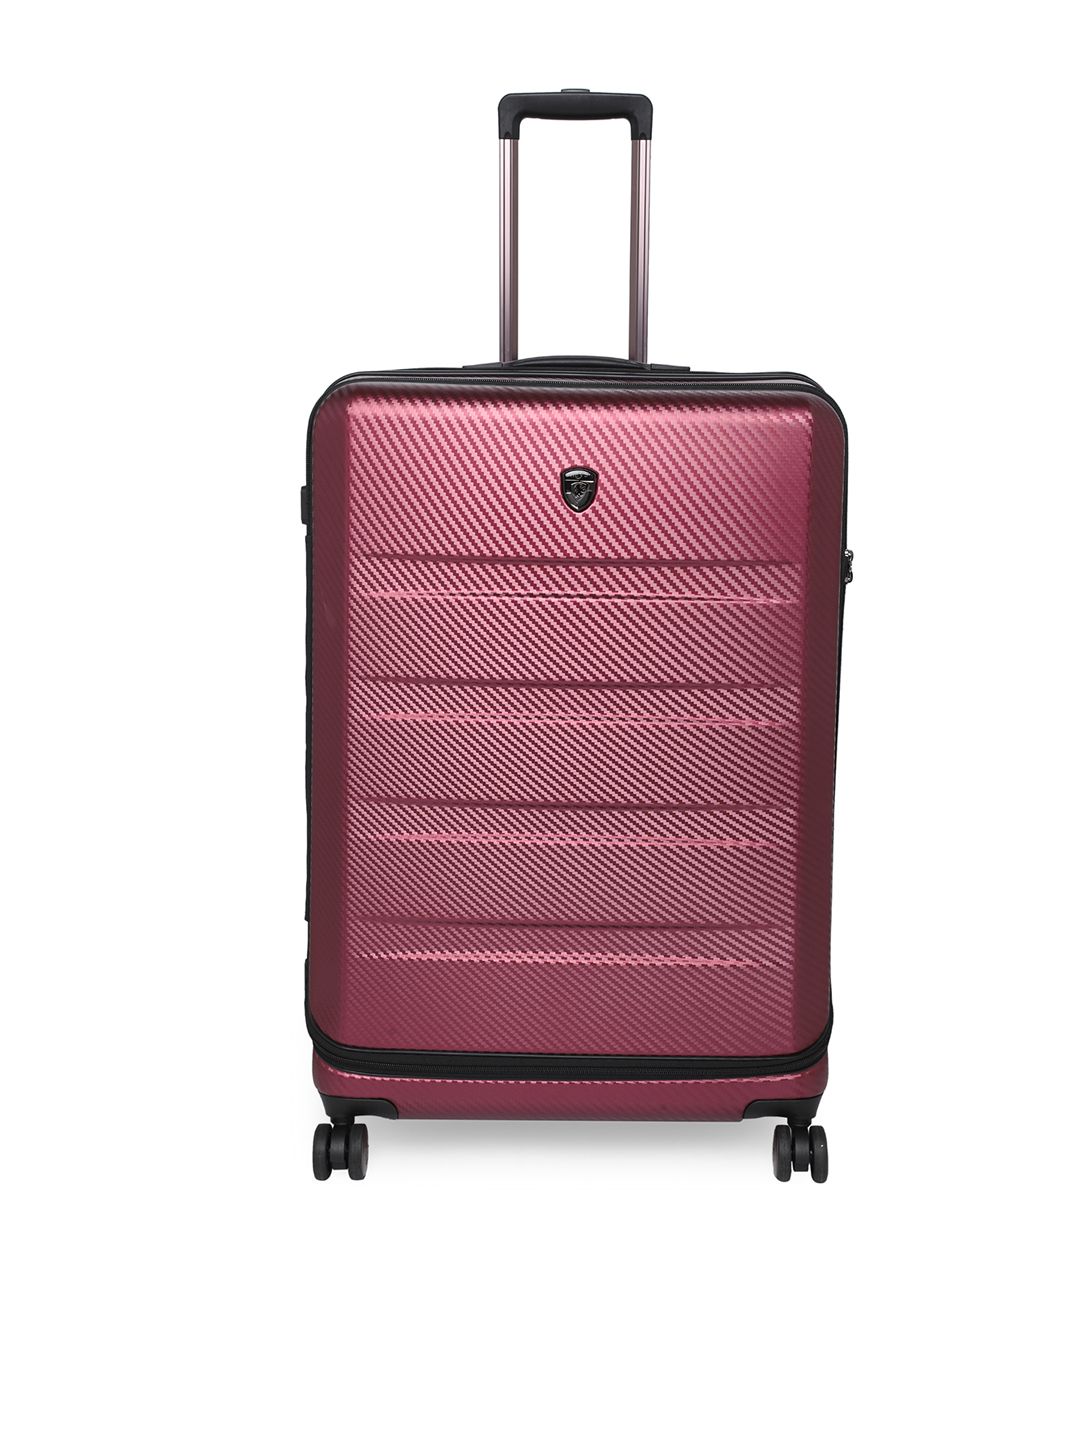 Heys Burgundy Textured Hard-Sided Large Trolley Suitcase Price in India